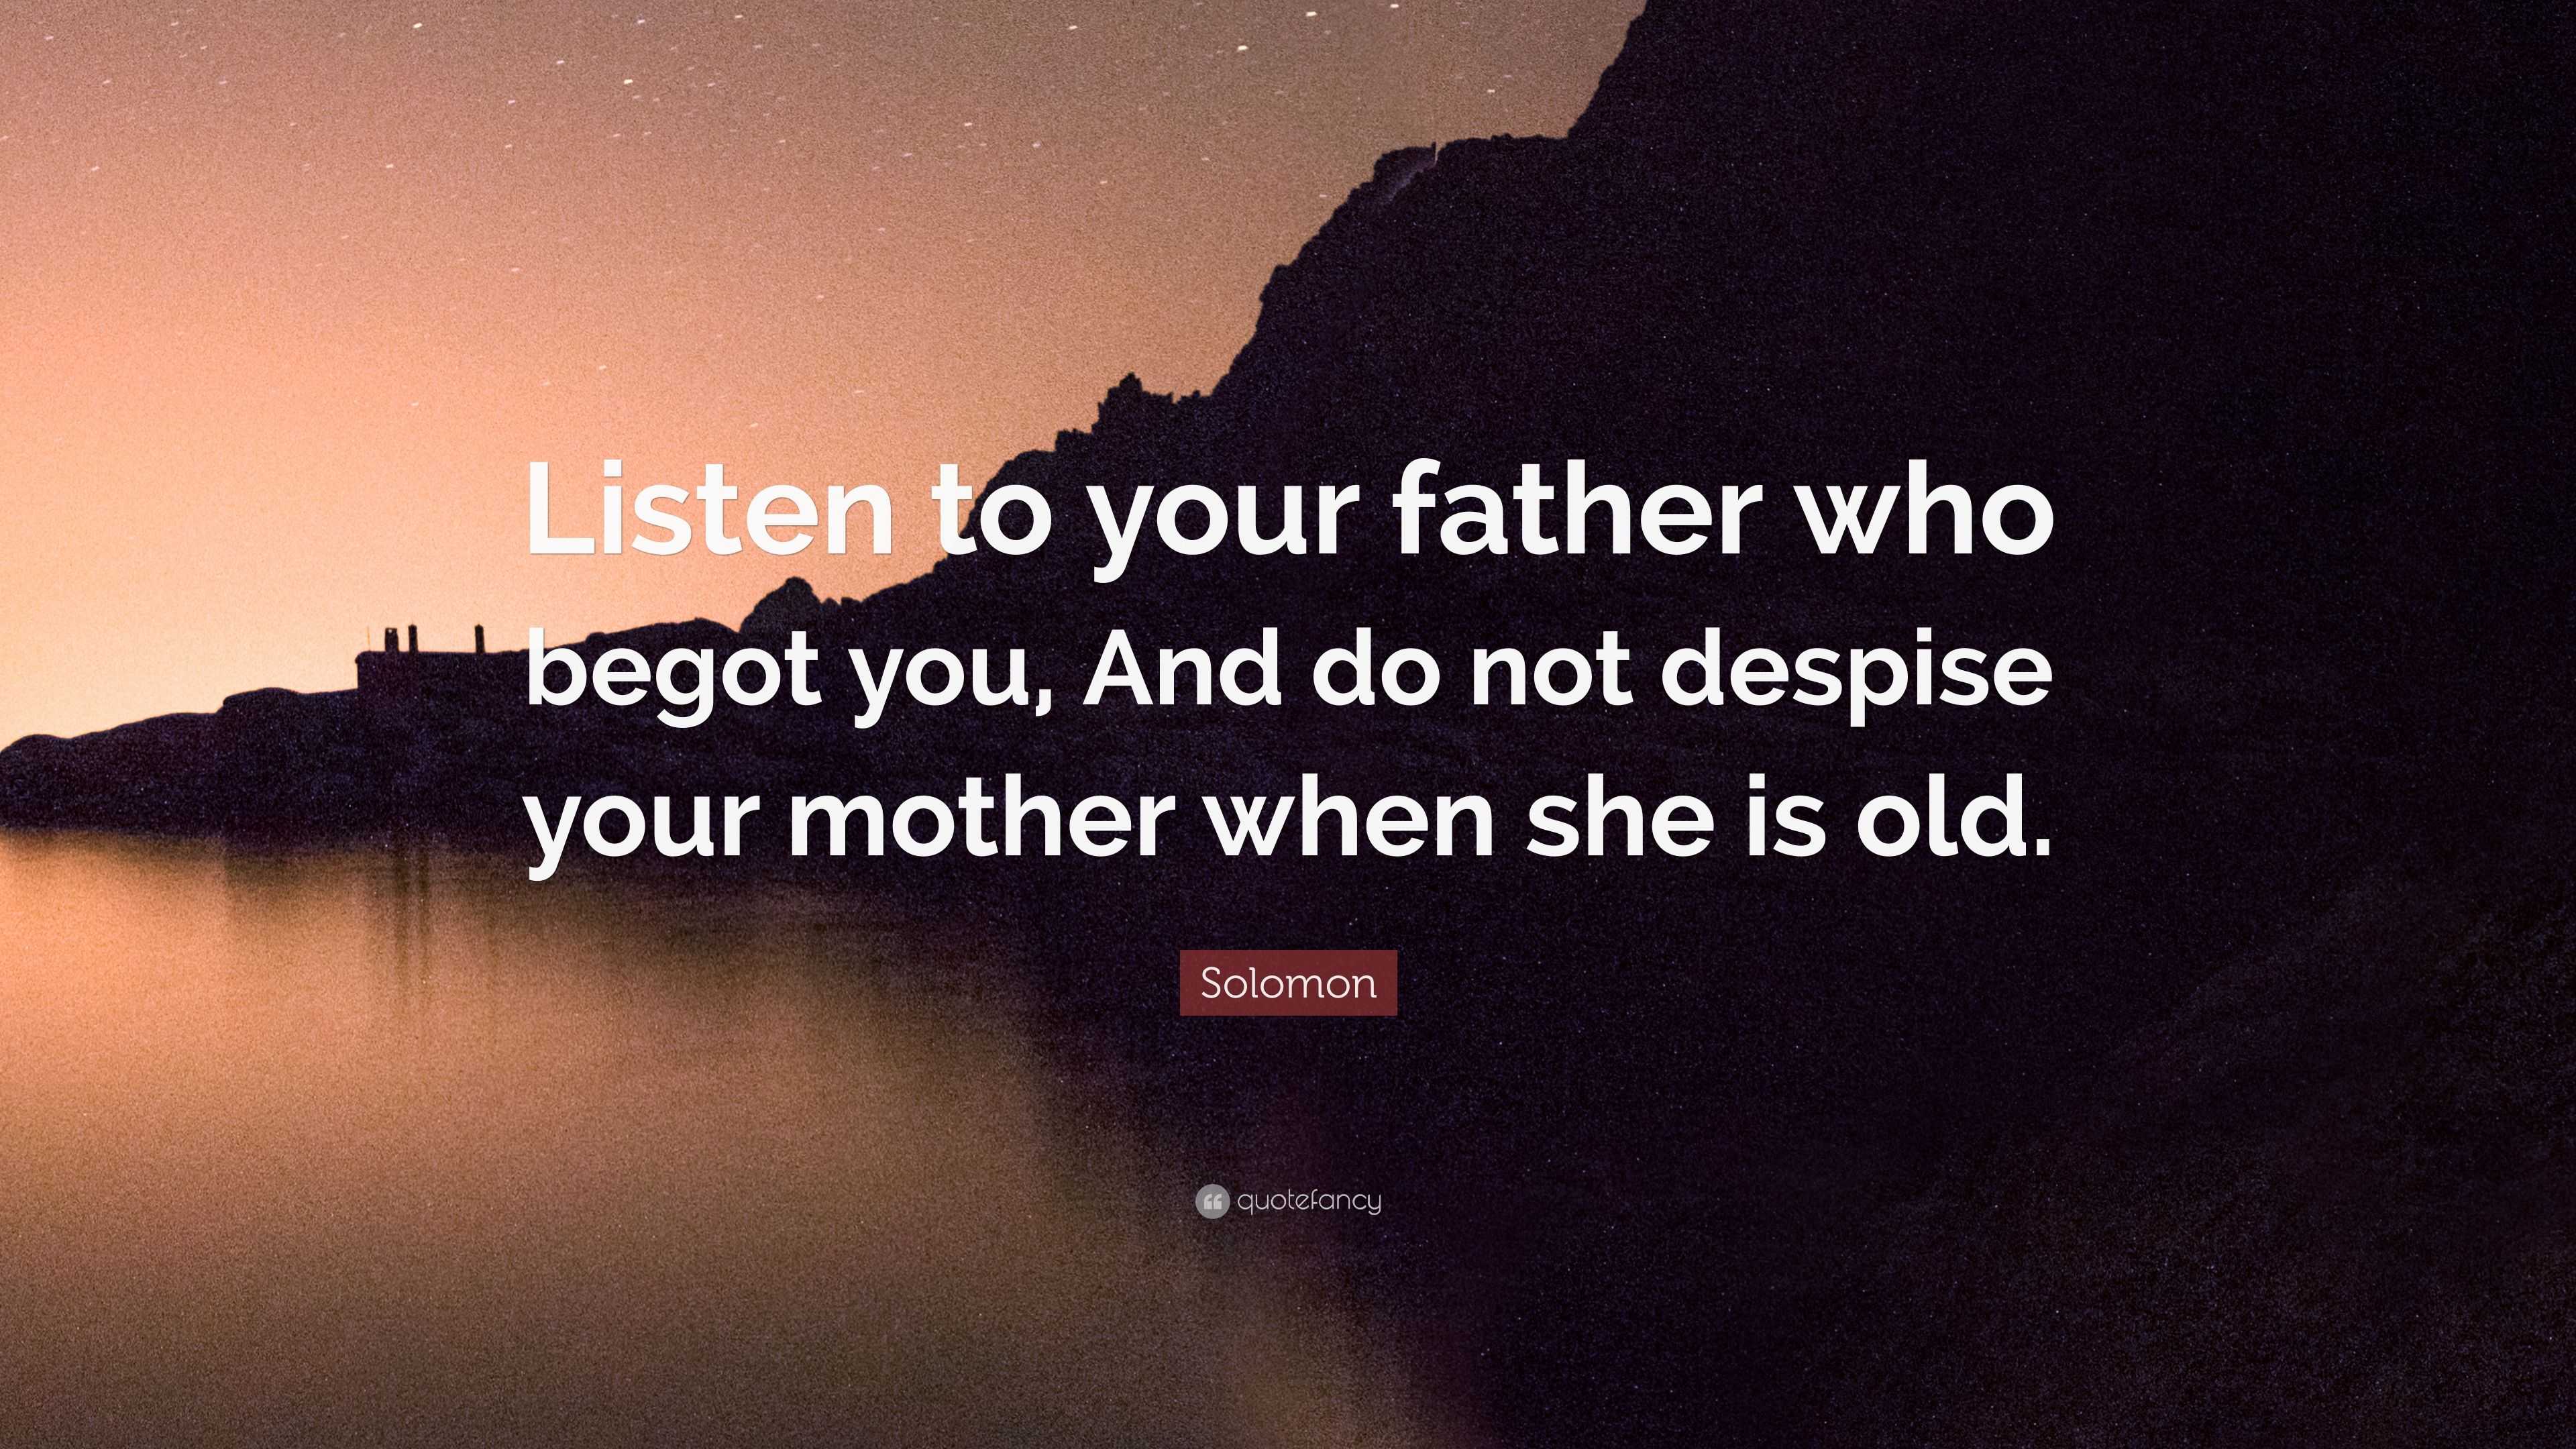 Solomon Quote: “Listen to your father who begot you, And do not despise  your mother when